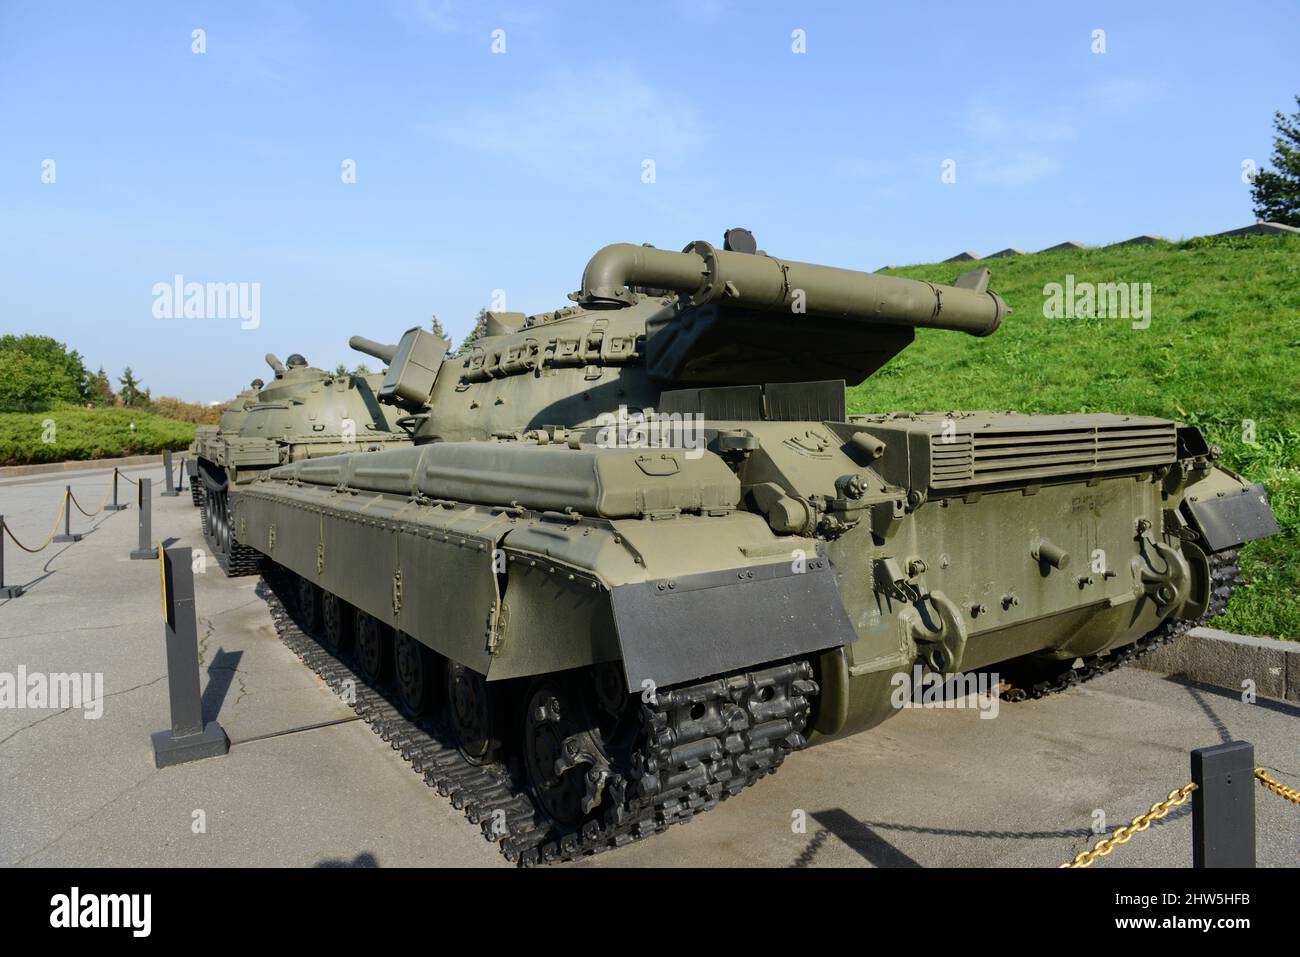 Memorial Complex of Museum of the Great Patriotic War. Military equipment displayed, both old or captured during the 2014 conflict in Eastern Ukraine. Stock Photo